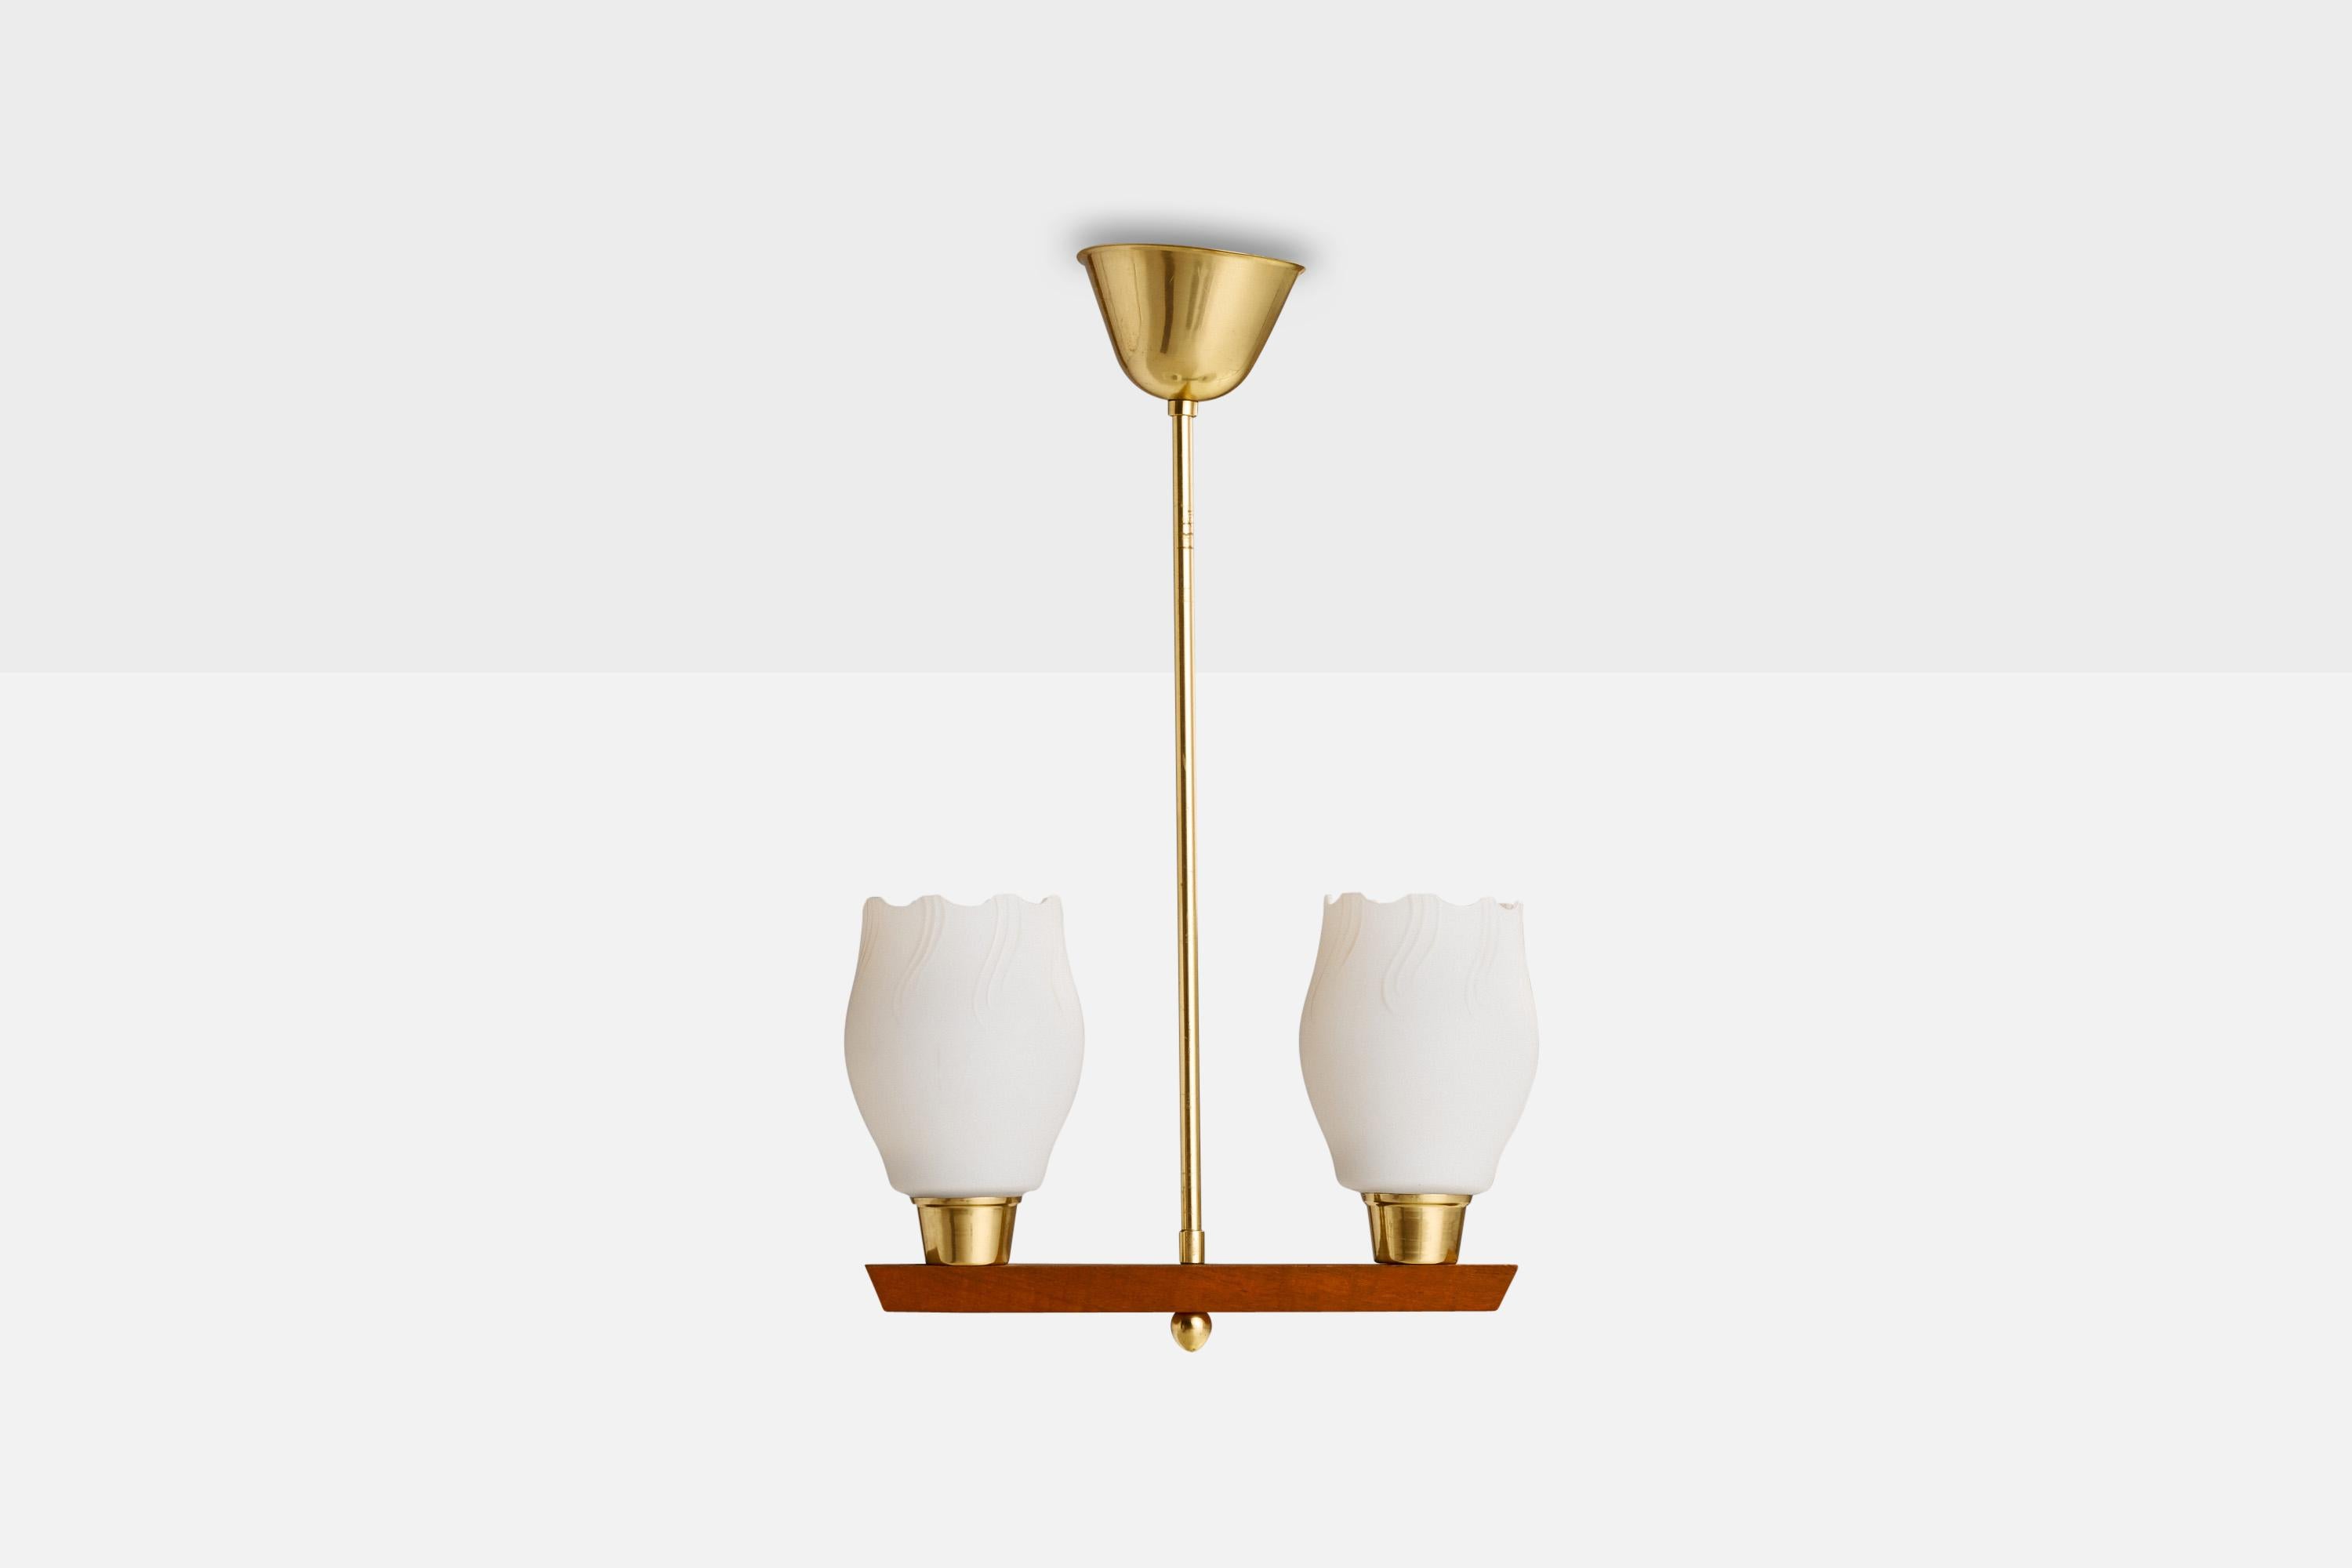 A brass, teak and glass pendant light designed and produced in Sweden, 1950s.

Dimensions of canopy (inches): 2.75” H x 4.25”  Diameter
Socket takes standard E-26 bulbs. 2 sockets.There is no maximum wattage stated on the fixture. All lighting will